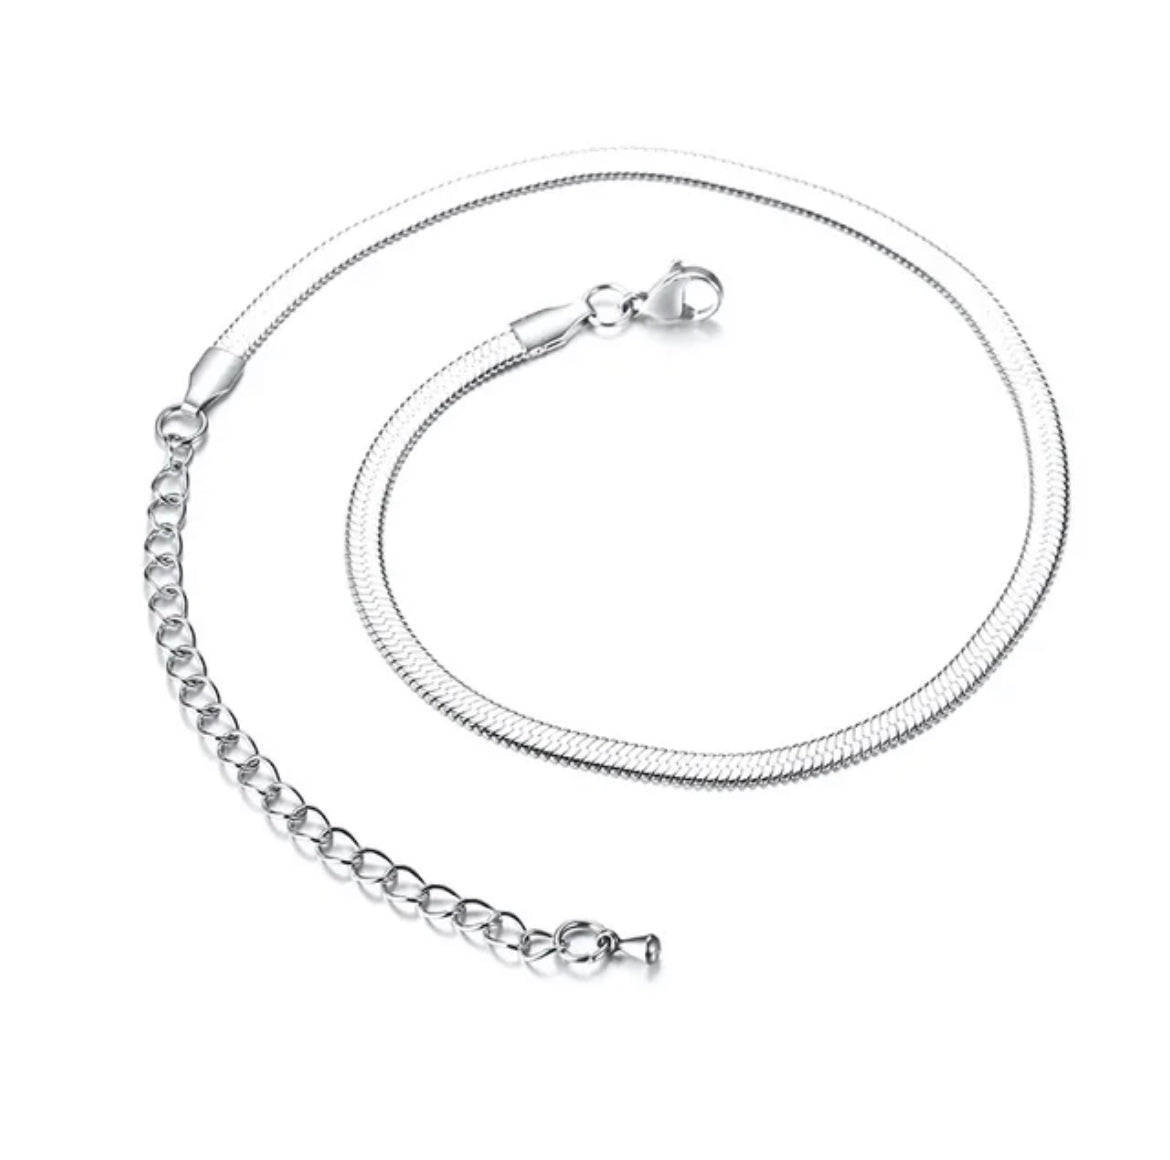 5mm Silver Herringbone Chain Necklace for Men | Classy Men Collection